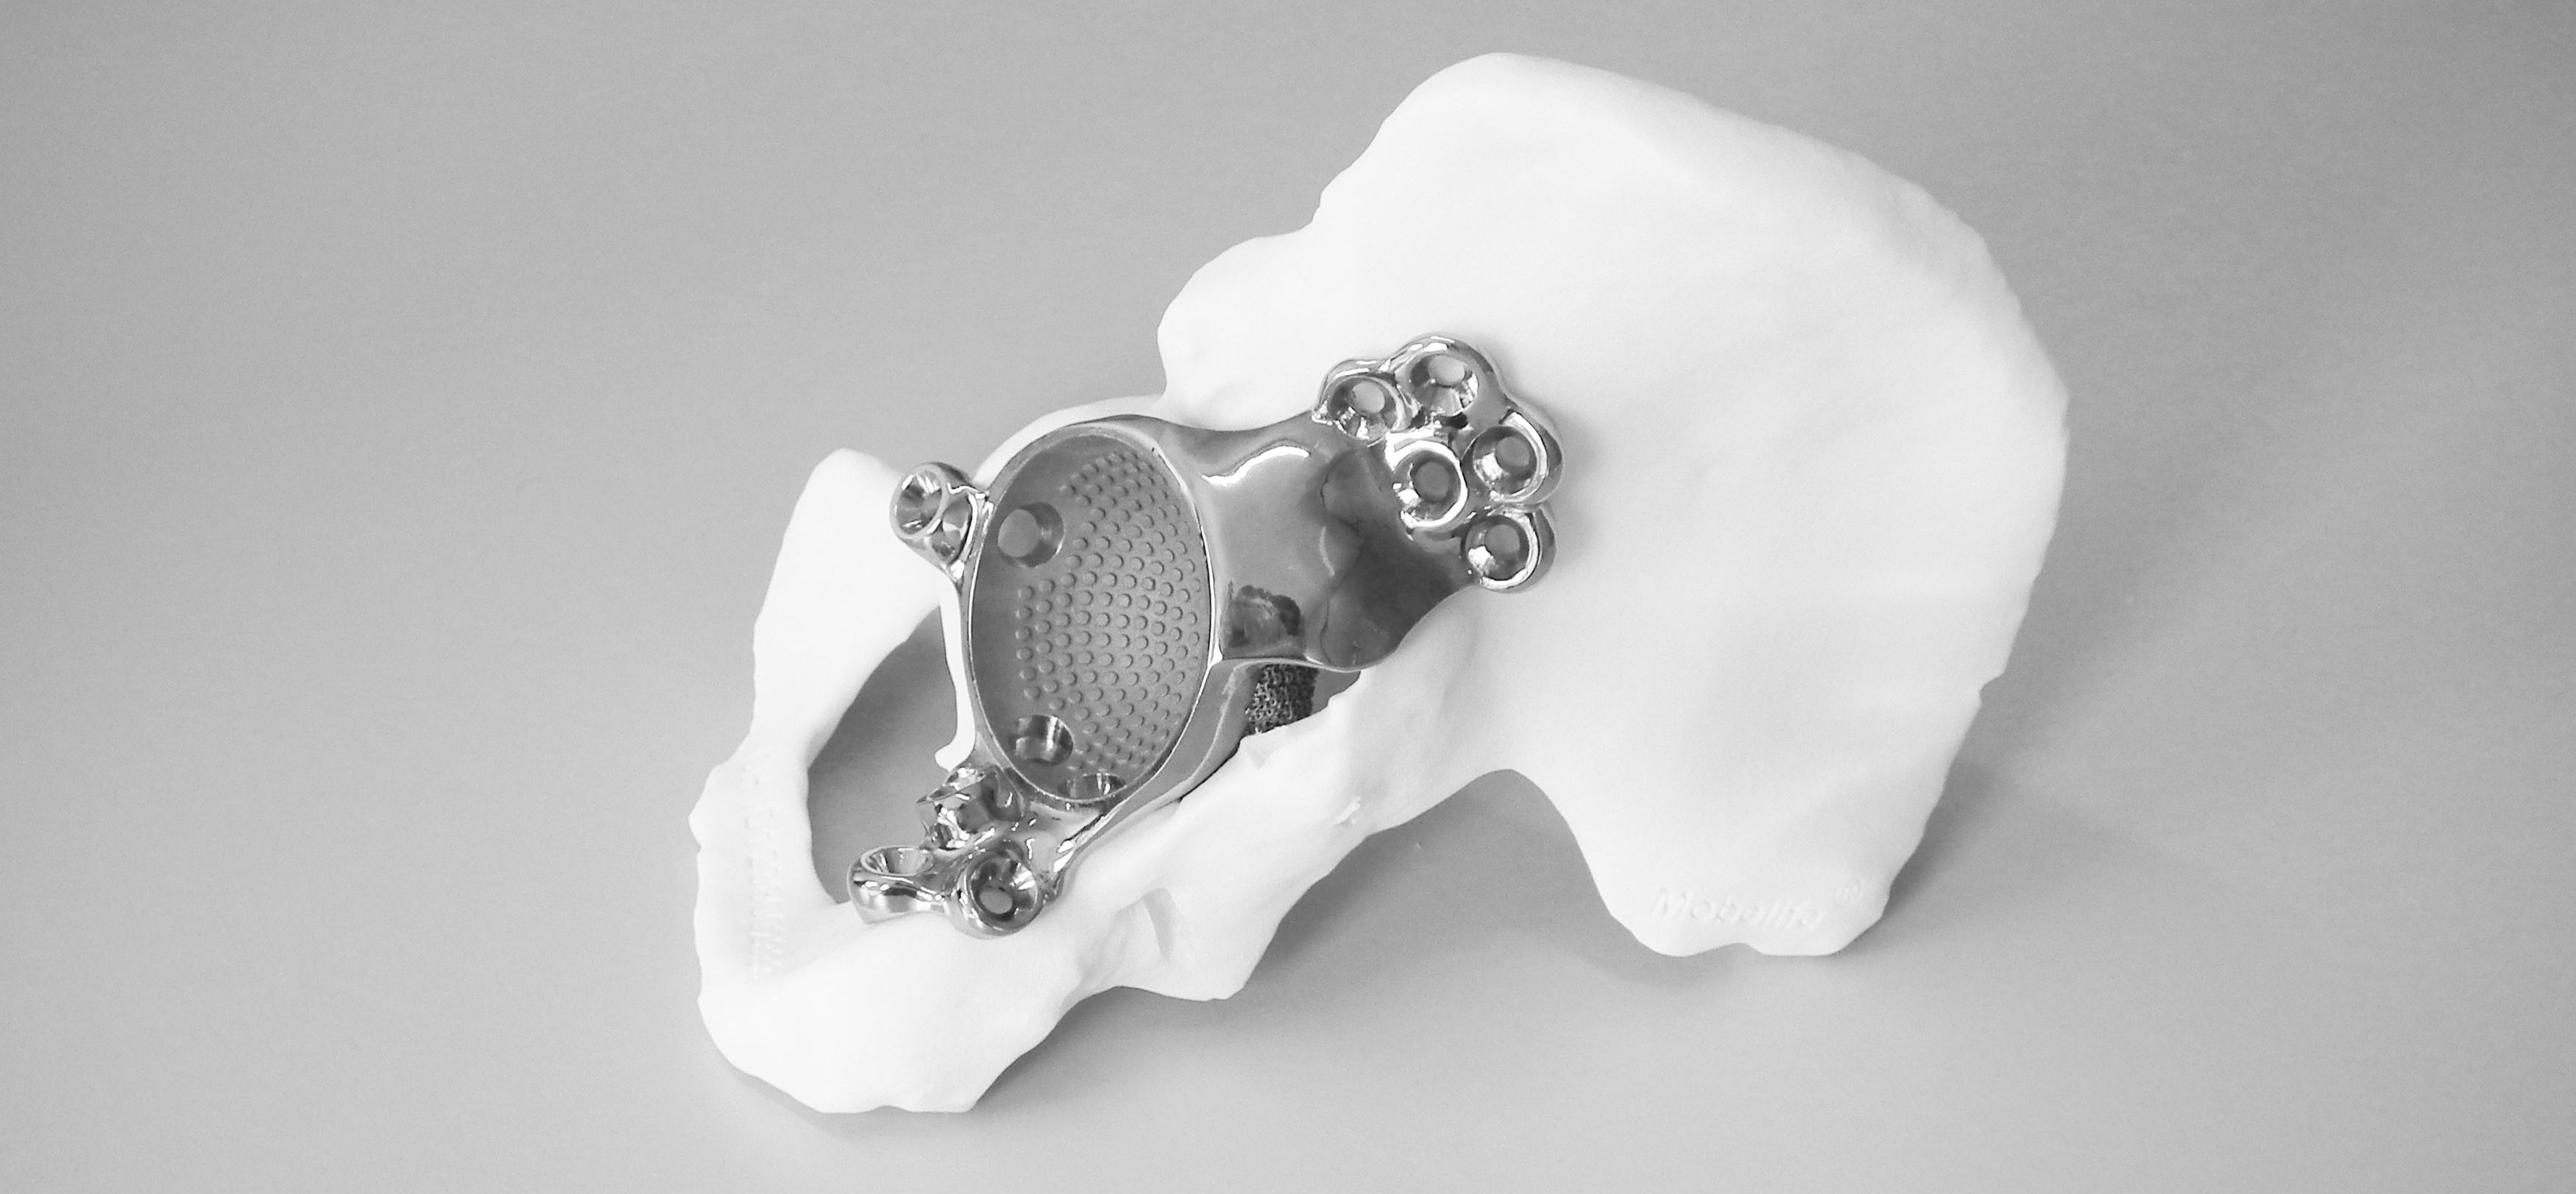 Benefits of 3D-Printed Implants